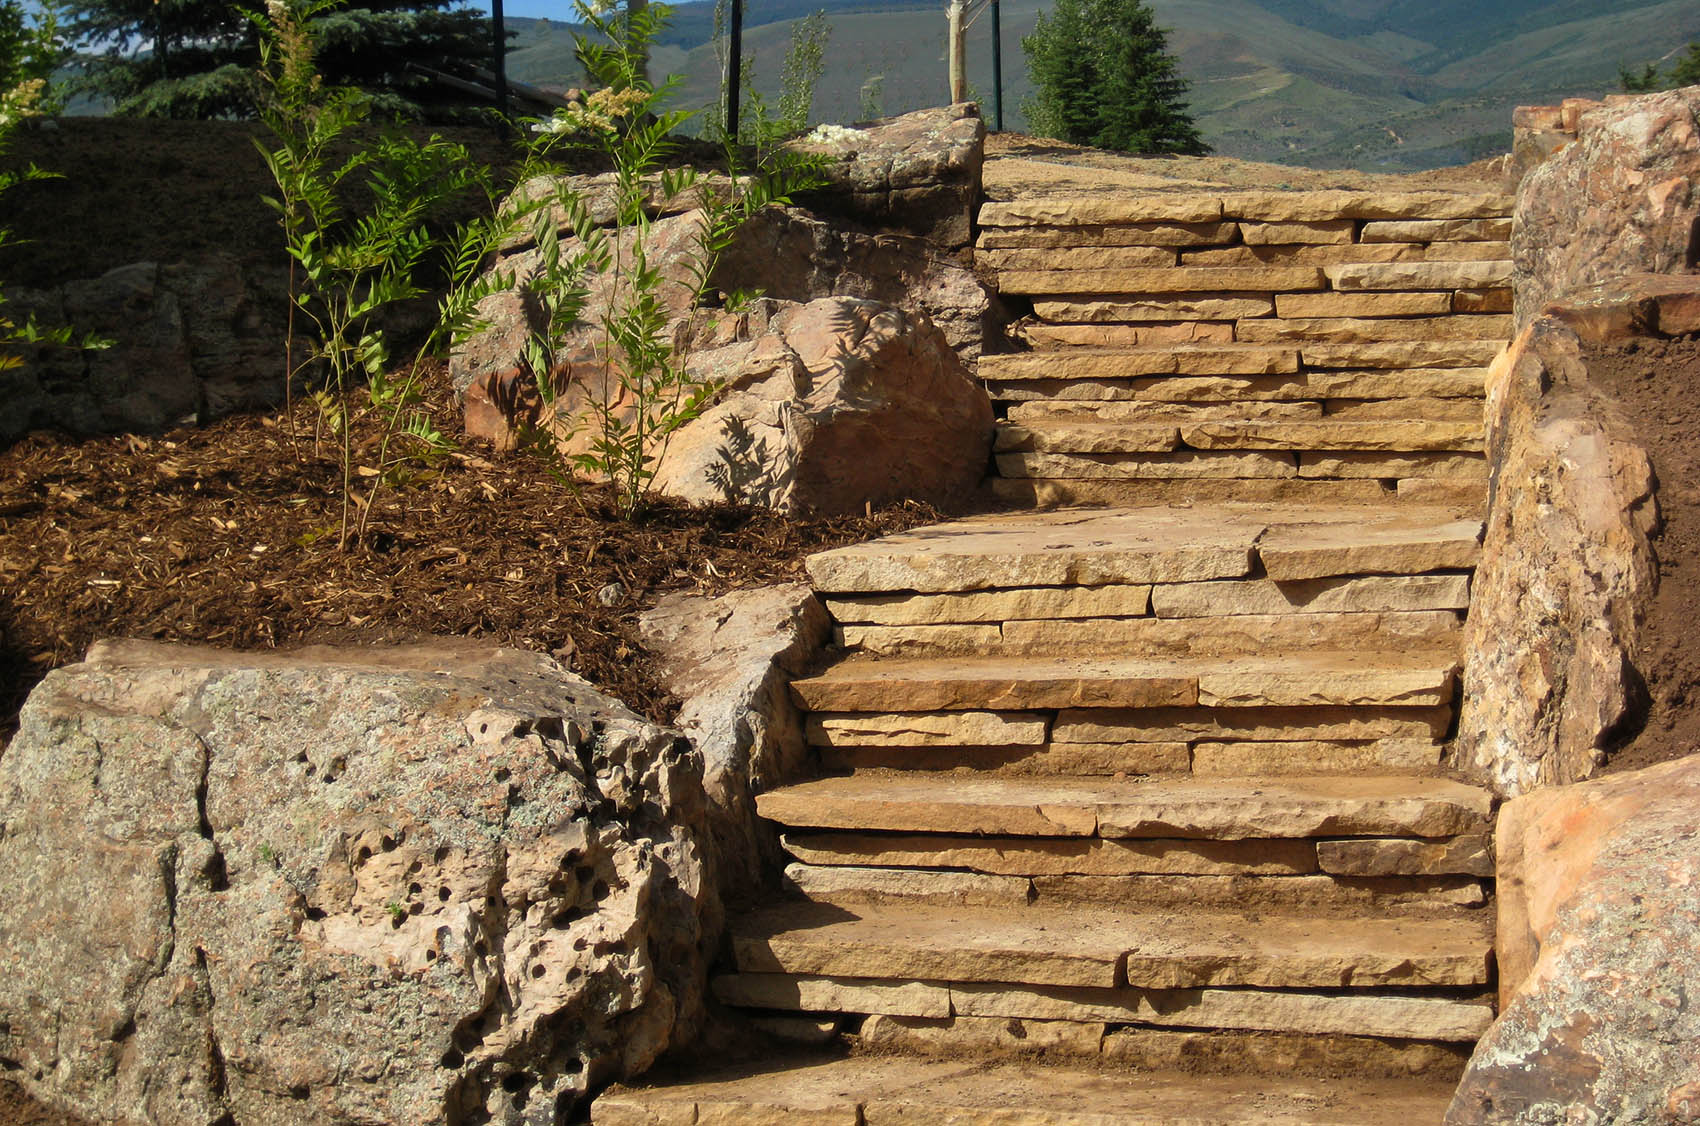 Natural stone steps ascend between large boulders and freshly mulched garden beds, with mountainous landscape and clear sky in the background.